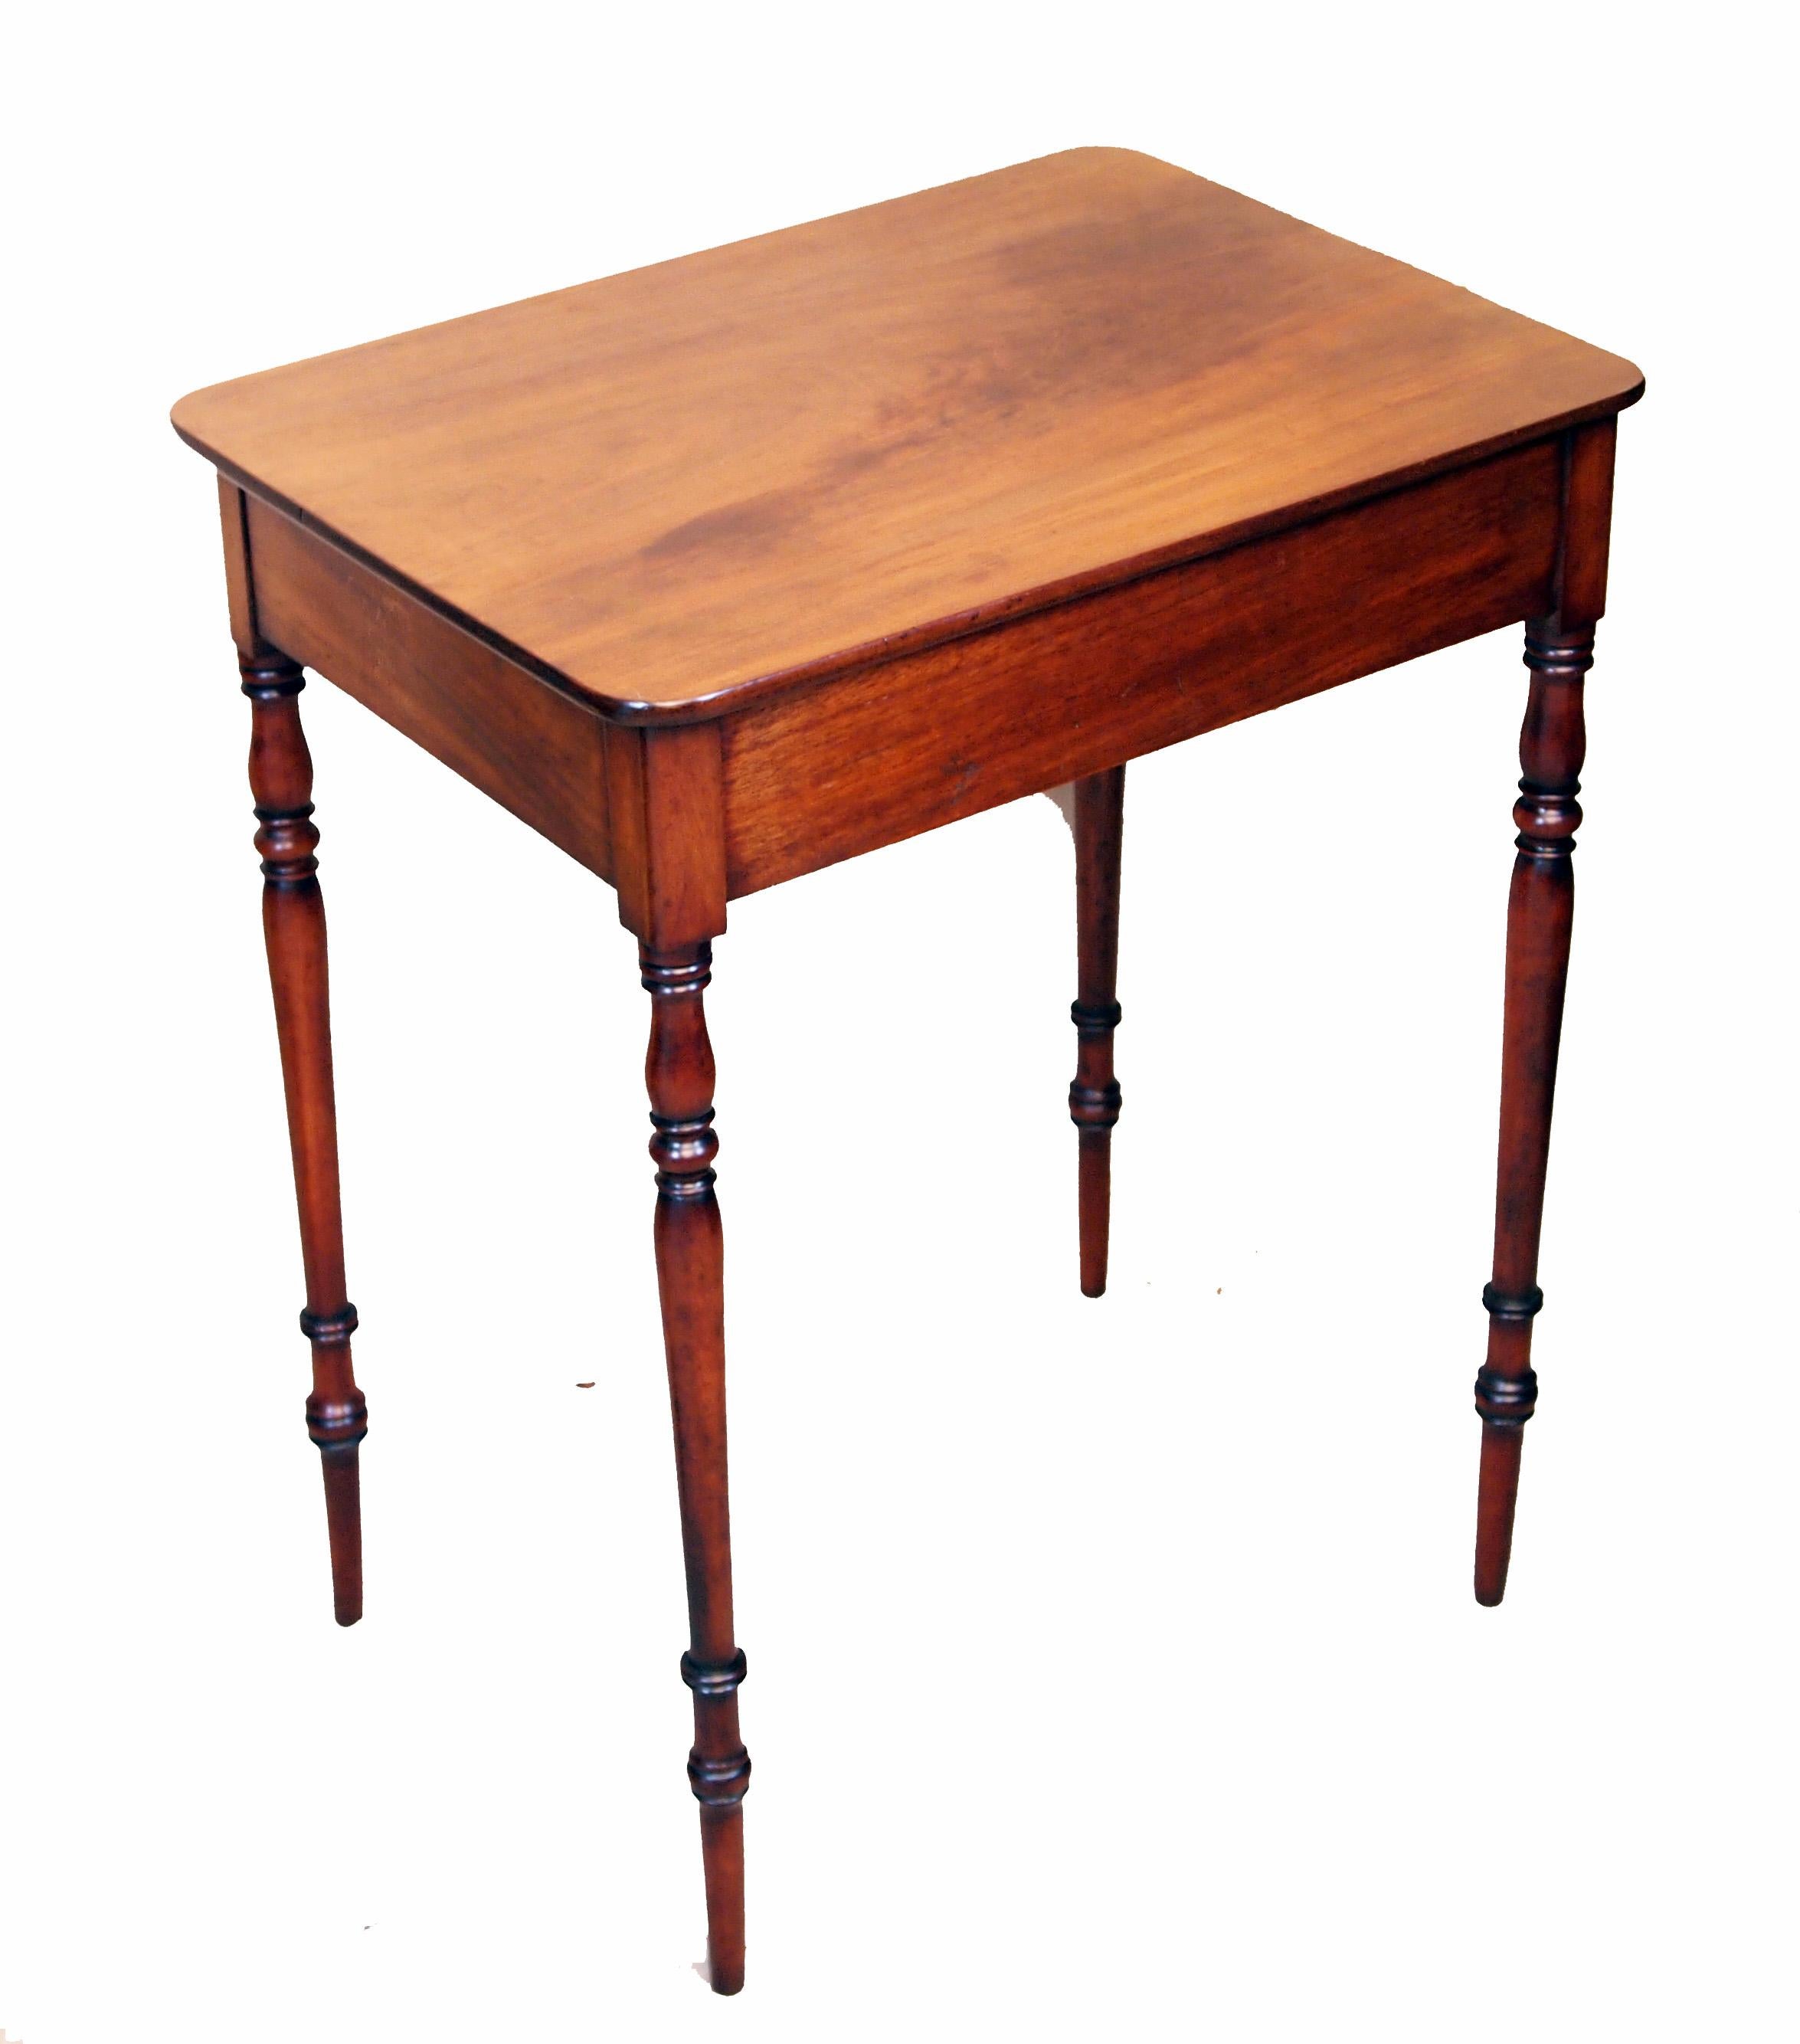 A very attractive Regency period mahogany side table of
diminutive proportions having well figured top above one frieze
drawer with original turned wooden knobs and ebonised
decoration raised on elegant turned legs

(This little Regency table